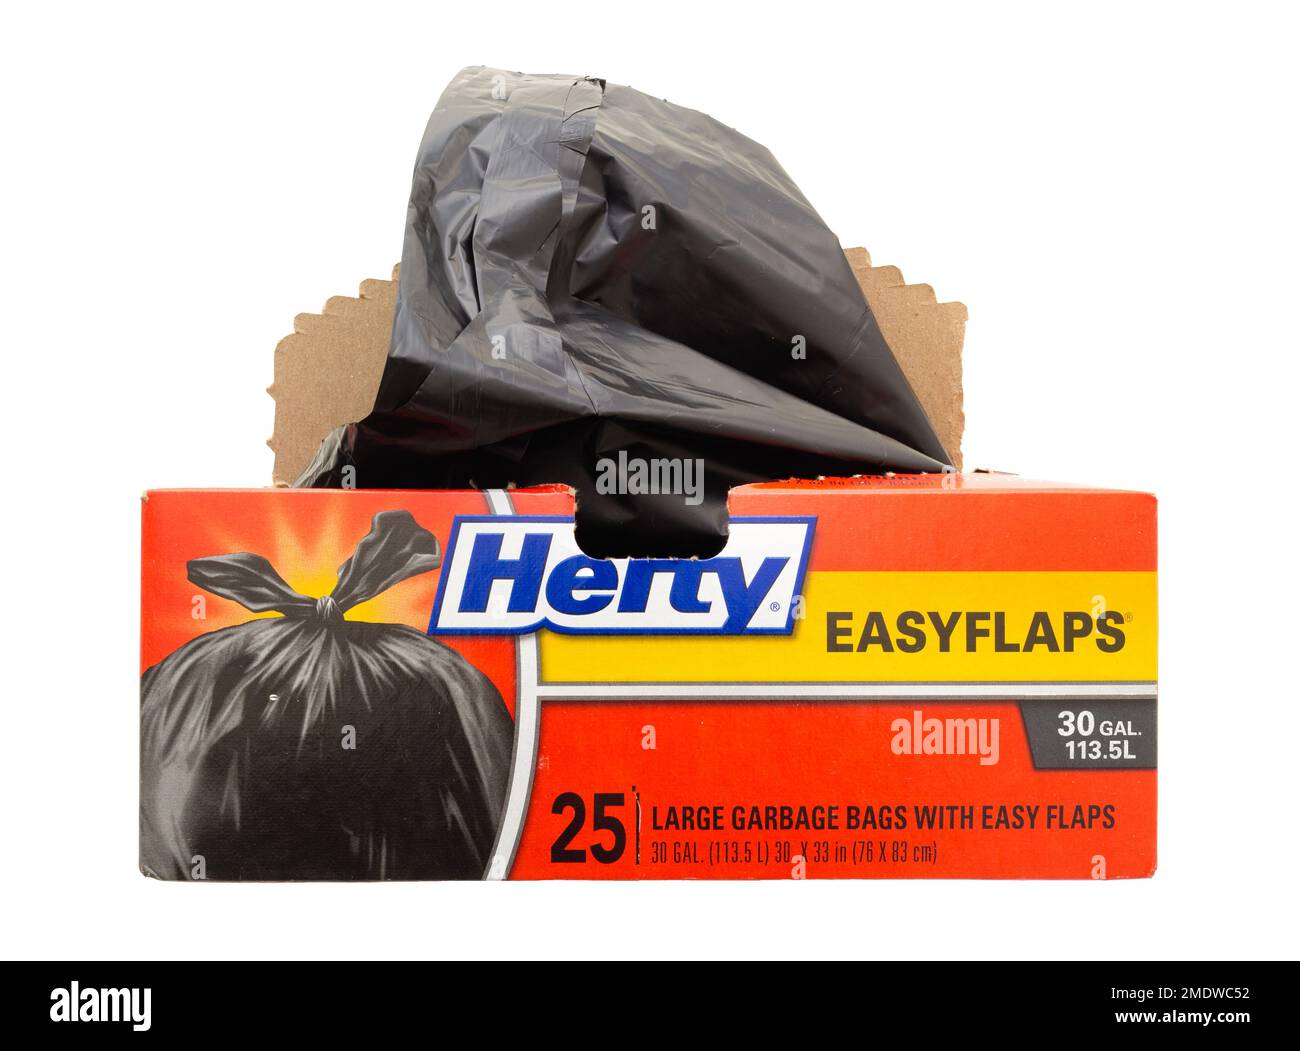 Pleasant Valley, Canada - January 23, 2023: Hefty Garbage Bags. Hefty is an American brand of household products and is owned by Reynolds Consumer Pro Stock Photo